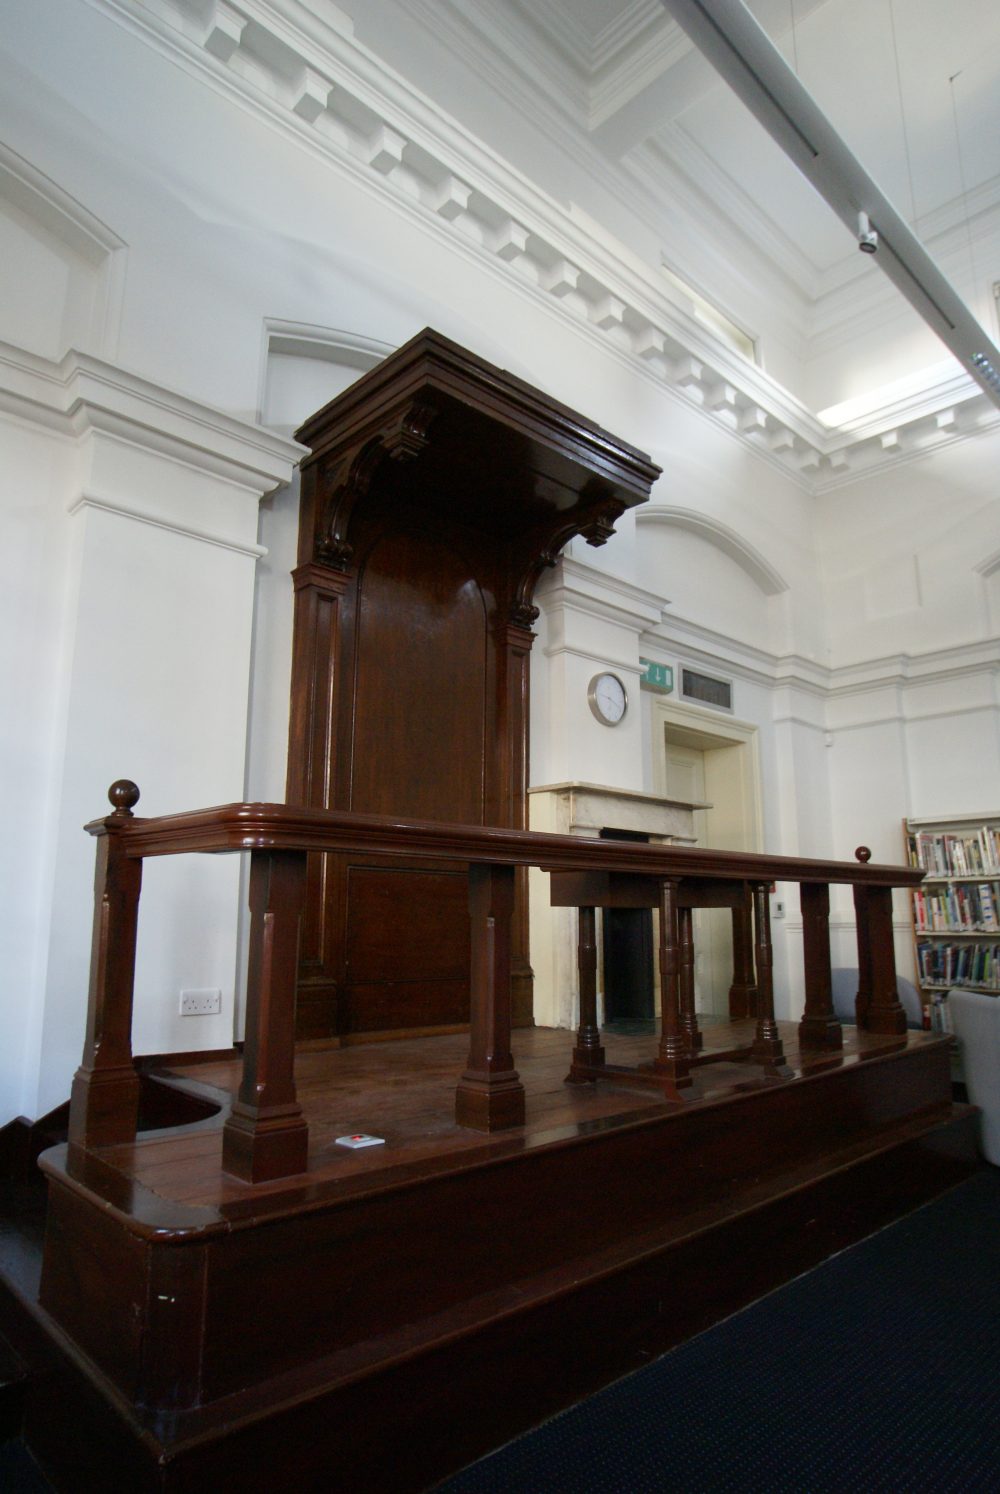 Wandsworth Town Library